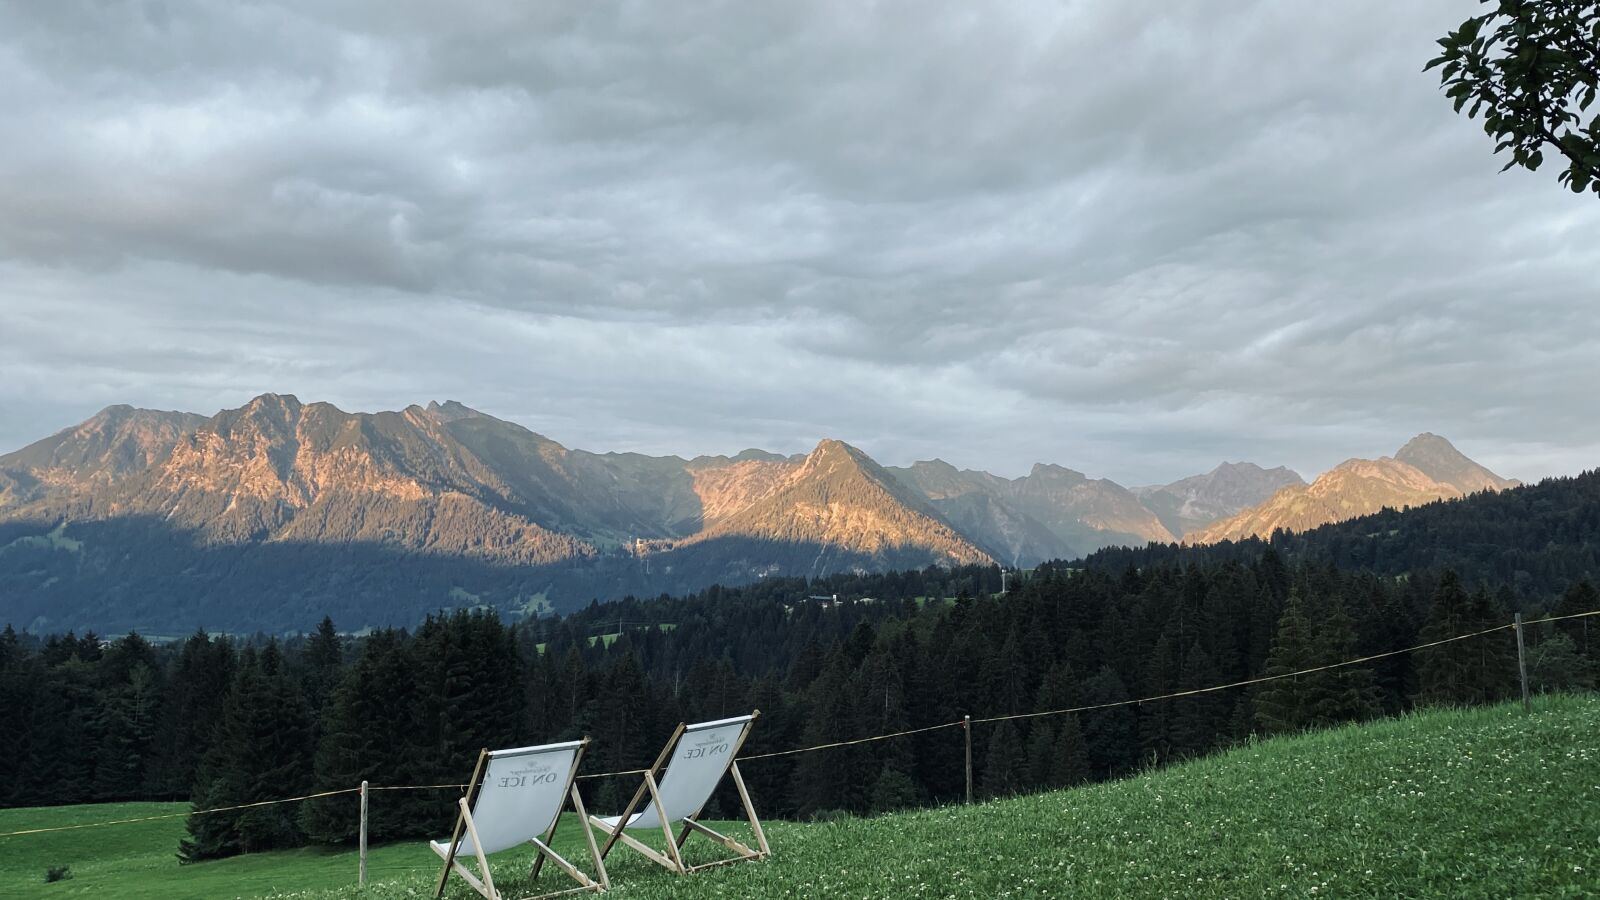 Apple iPhone 11 Pro + iPhone 11 Pro back triple camera 4.25mm f/1.8 sample photo. Mountains, meadow, deck chair photography